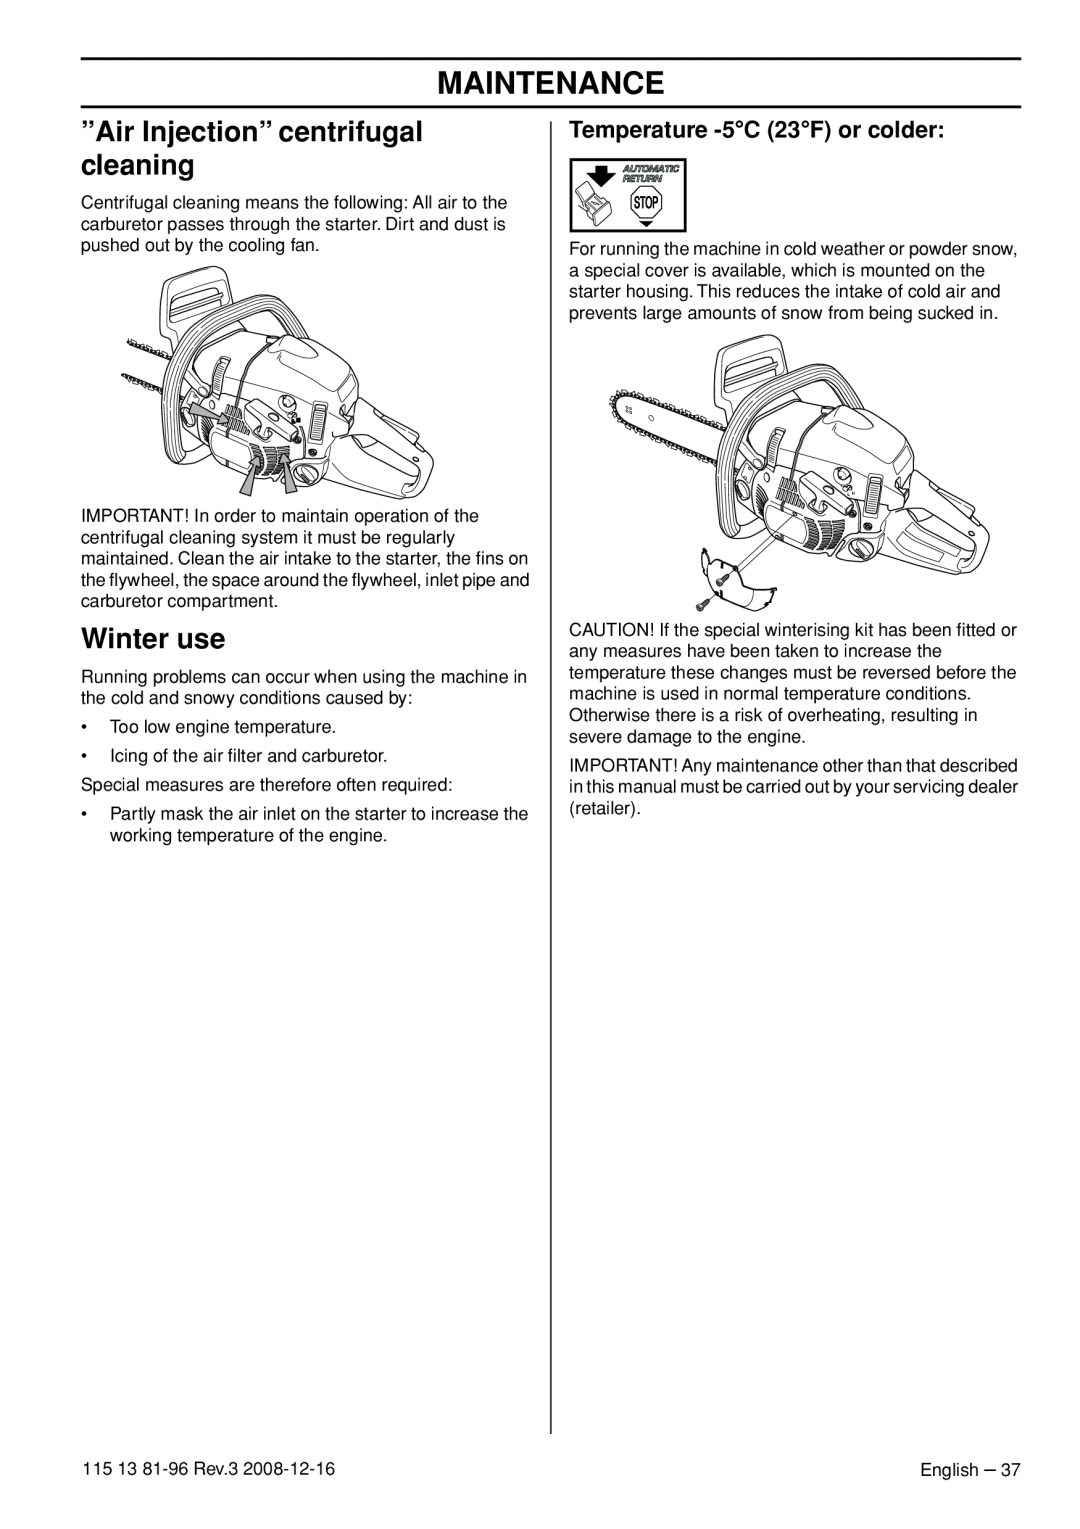 Husqvarna 445 EPA III manual ”Air Injection” centrifugal cleaning, Winter use, Temperature -5C 23F or colder, Maintenance 